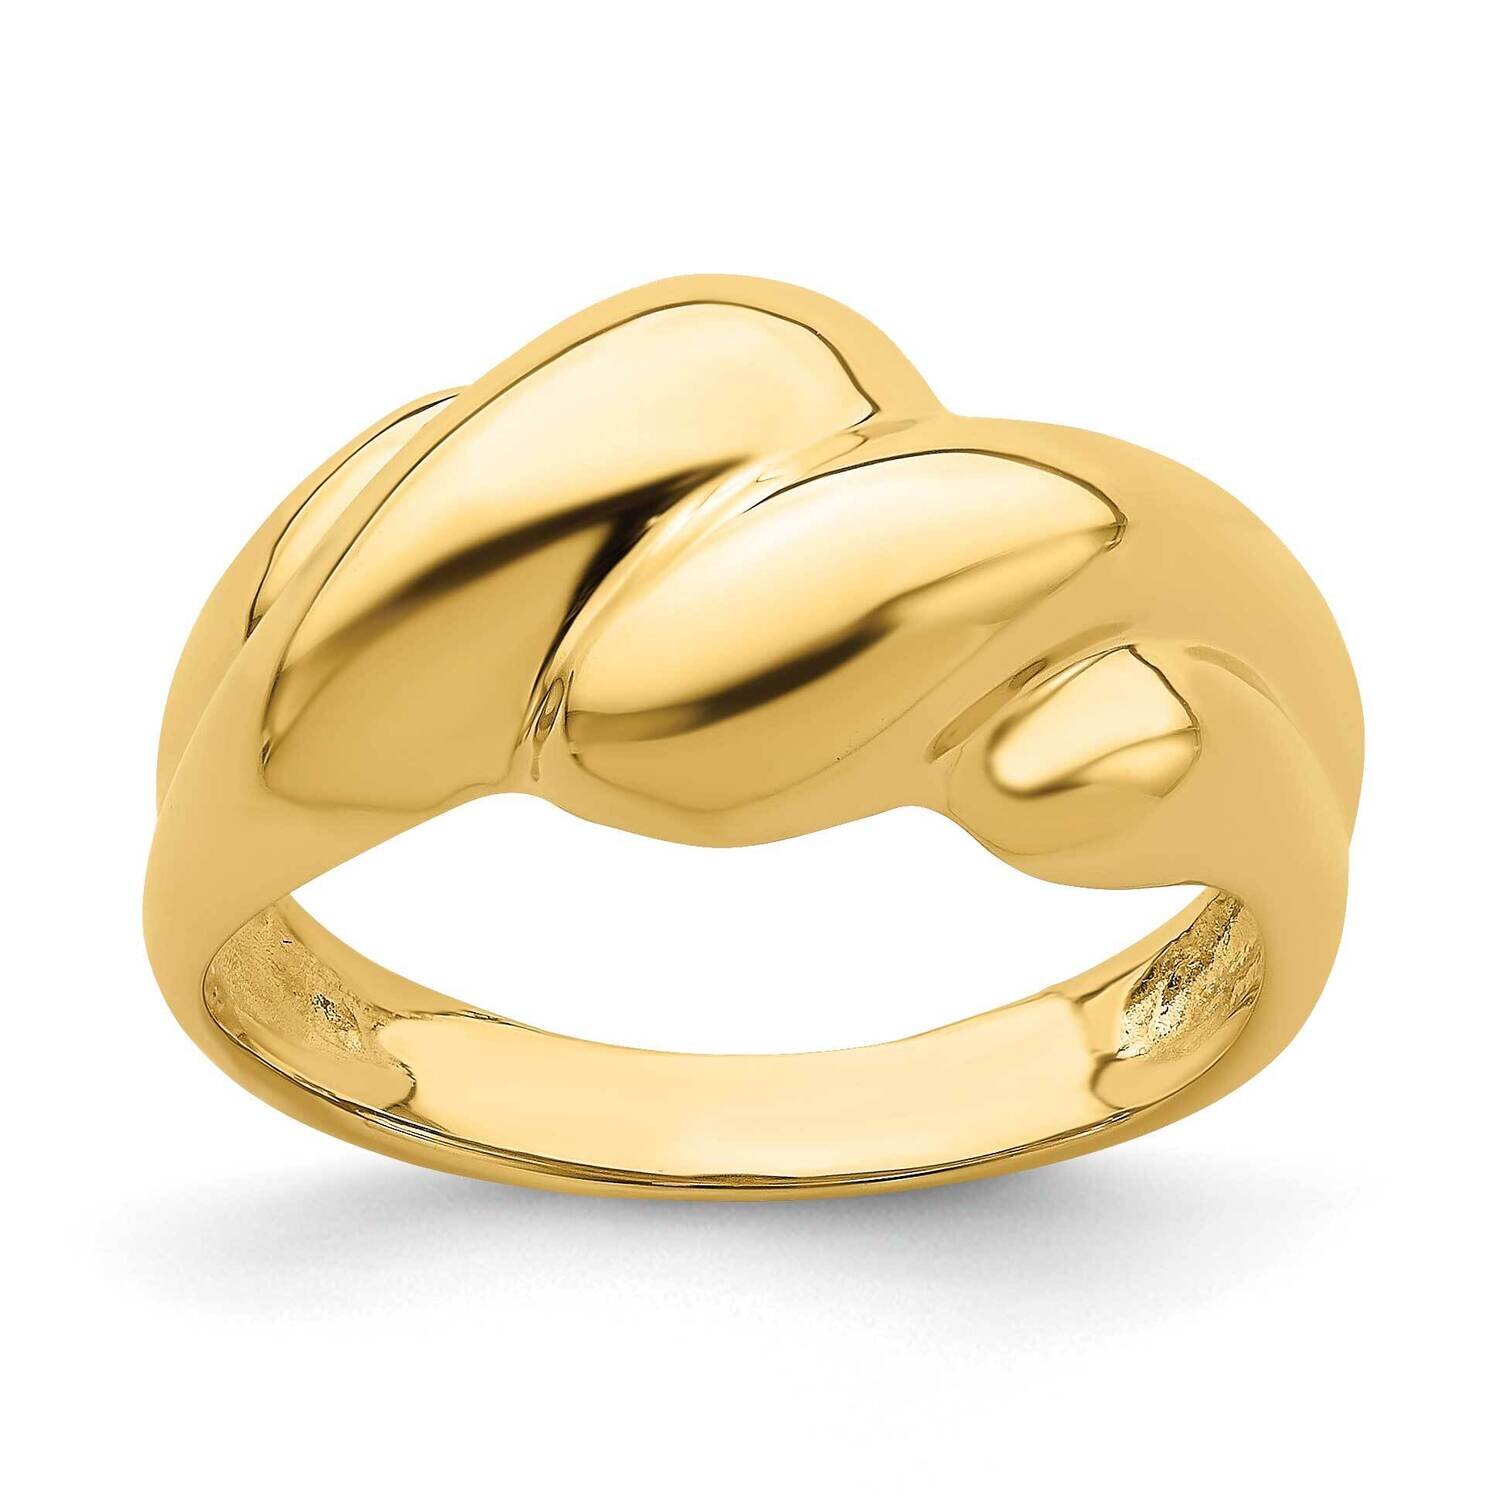 Fashion Dome Ring 14k Gold Polished R713